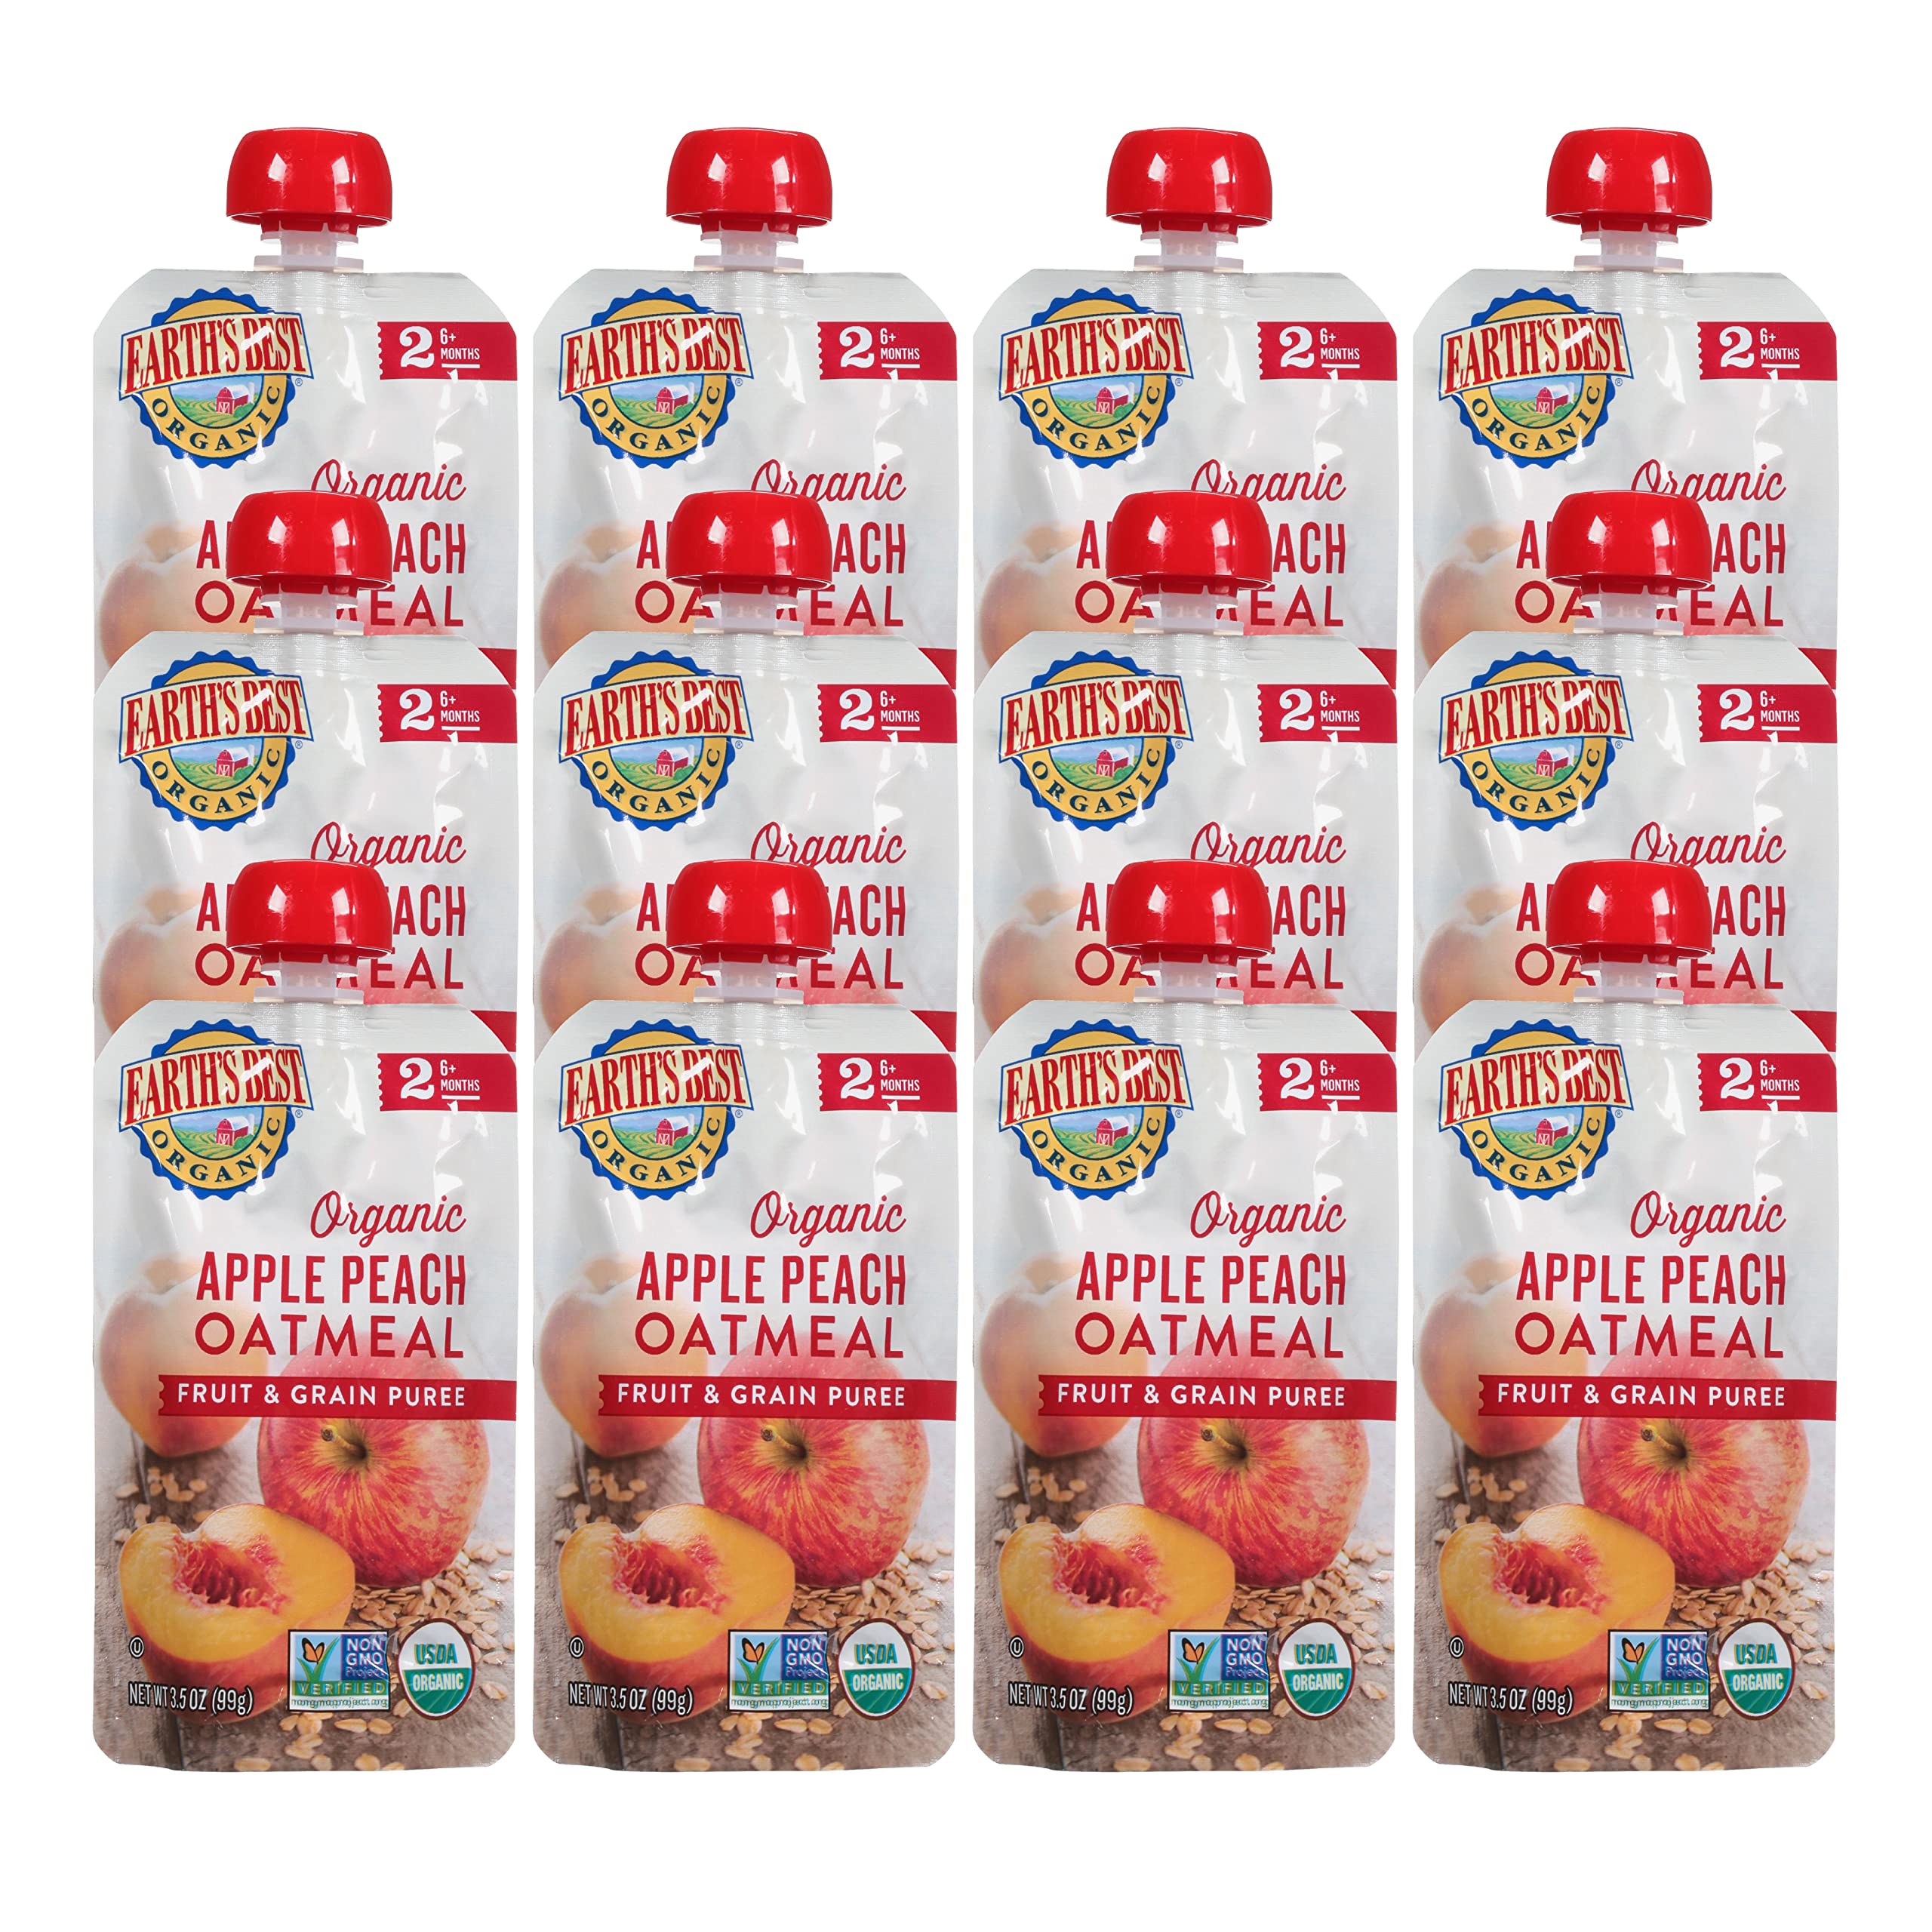 Book Cover Earth's Best Organic Baby Food Pouches, Stage 2 Fruit and Grain Puree for Babies 6 Months and Older, Organic Apple Peach and Oatmeal Puree, 3.5 oz Resealable Pouch (Pack of 12) Apple Peach Oatmeal